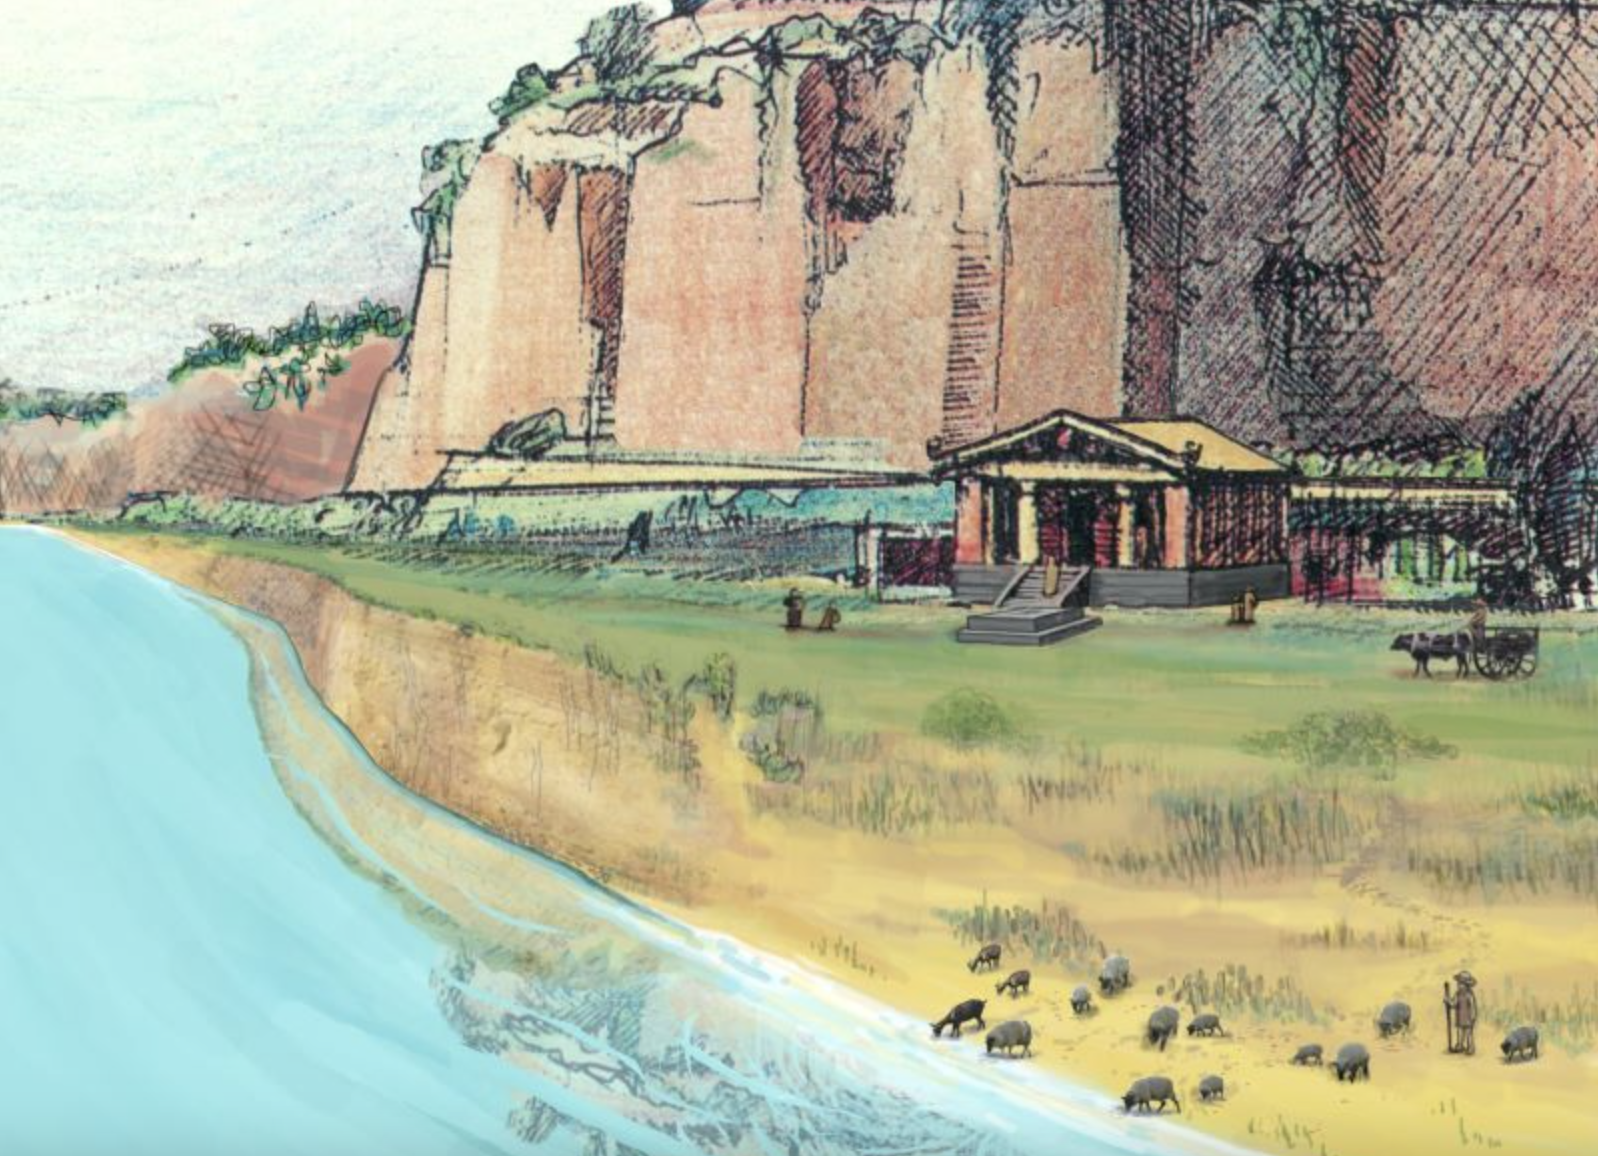 artist's impression of life on the banks of a river